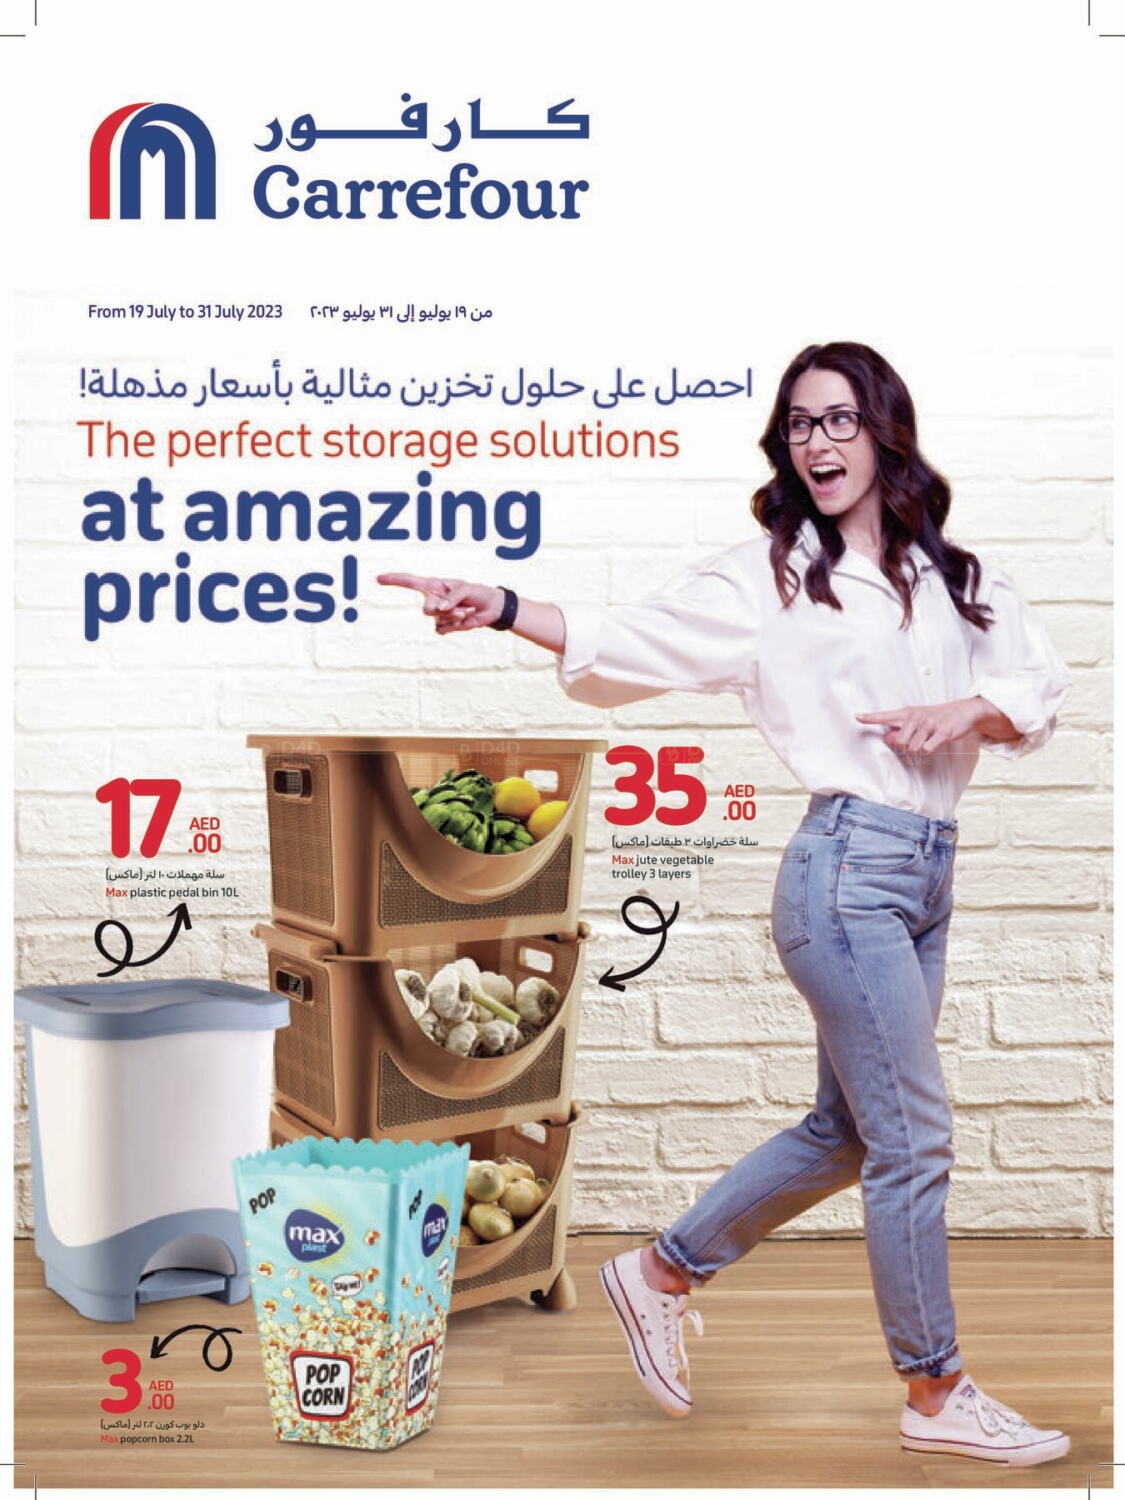 Carrefour UAE The Perfect Storage Solutions at Amazing Prices in UAE ...